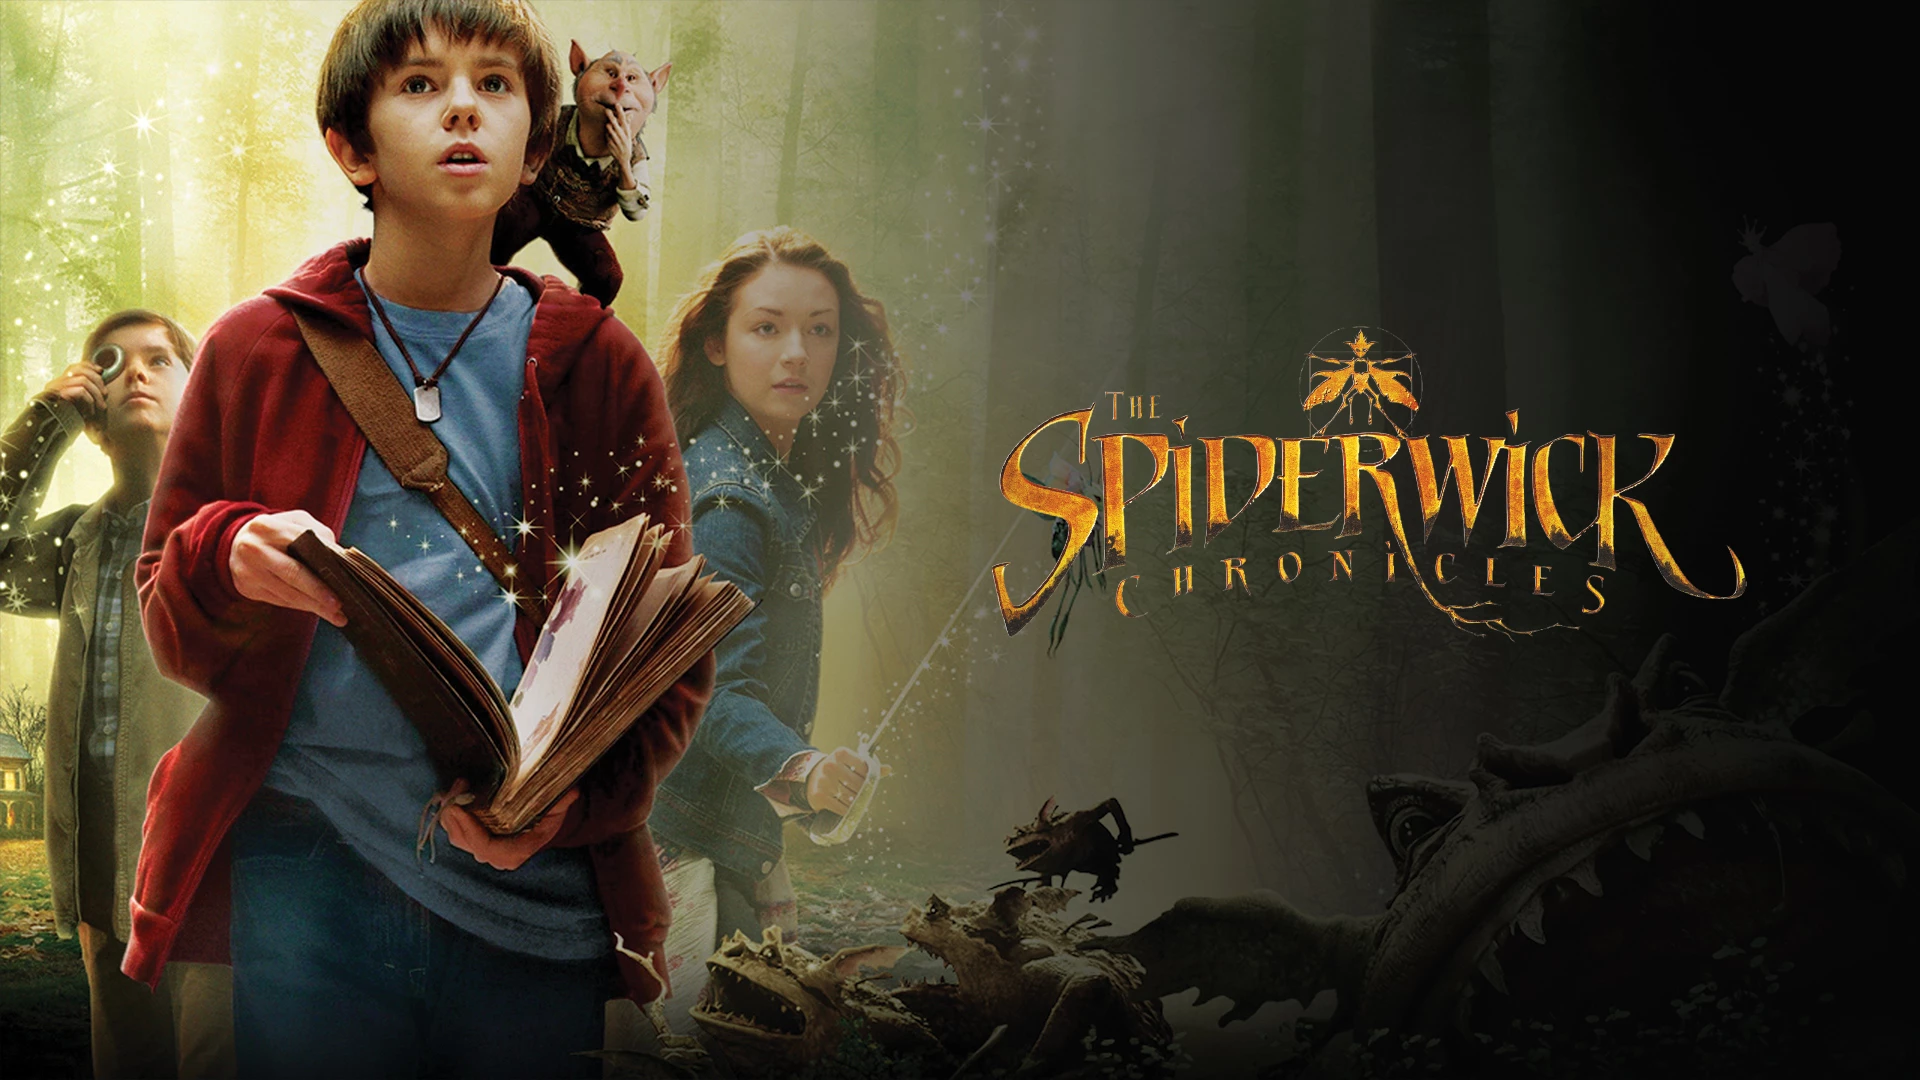 movies like chronicles of narnia - The Spiderwick Chronicles (2008)